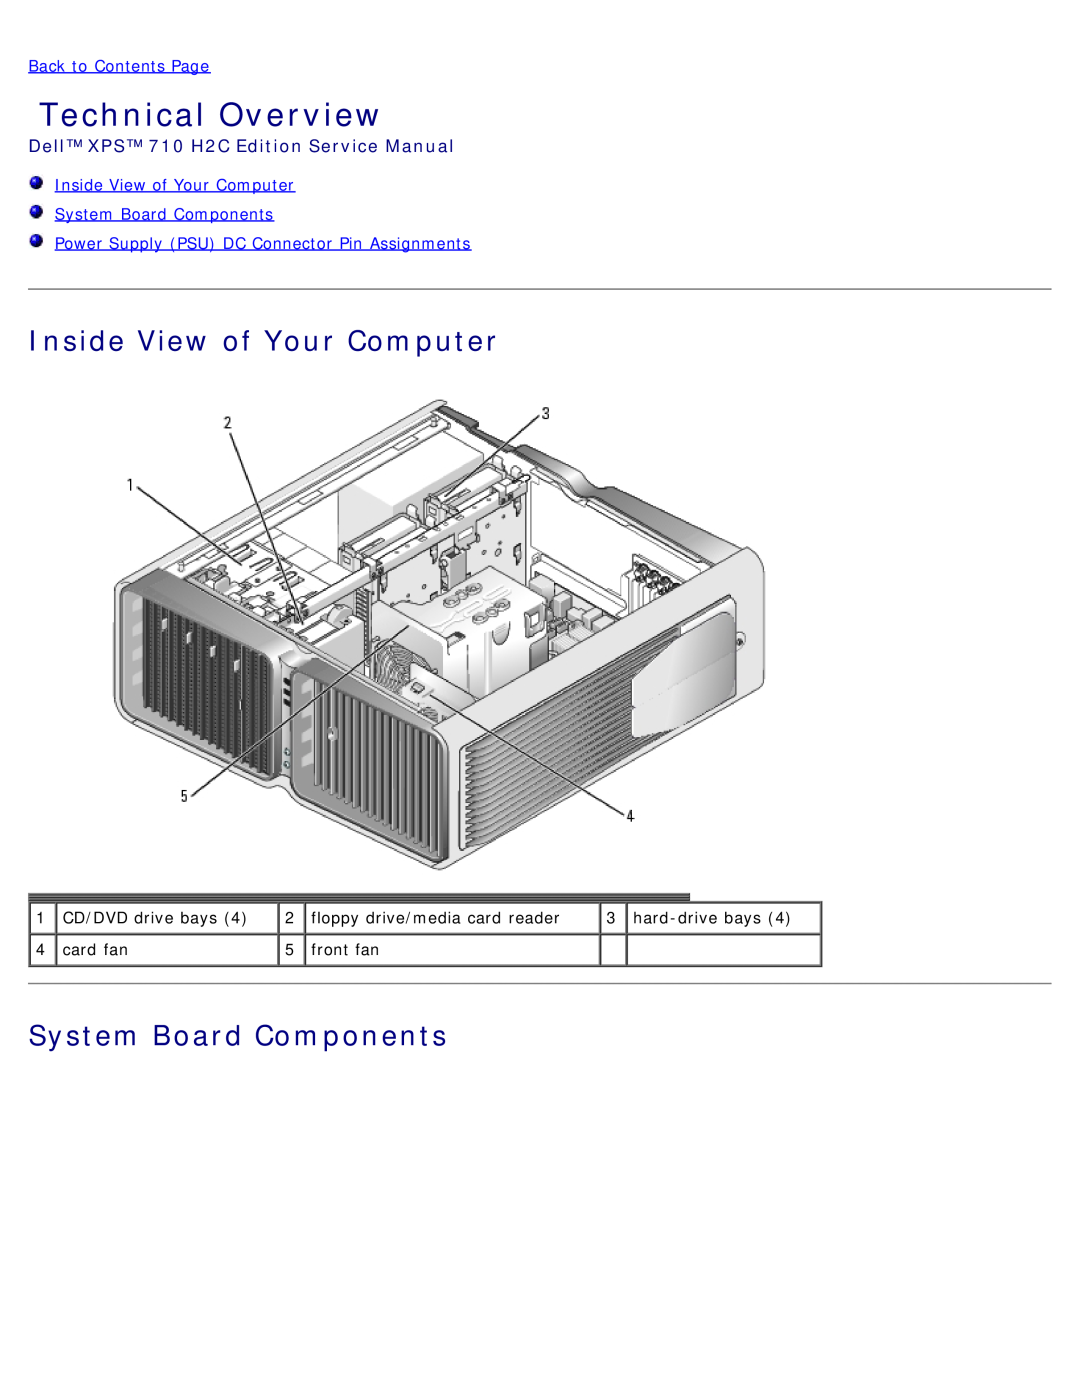 Dell DCDO, 710 H2C Technical Overview, Inside View of Your Computer, System Board Components, Back to Contents Page 